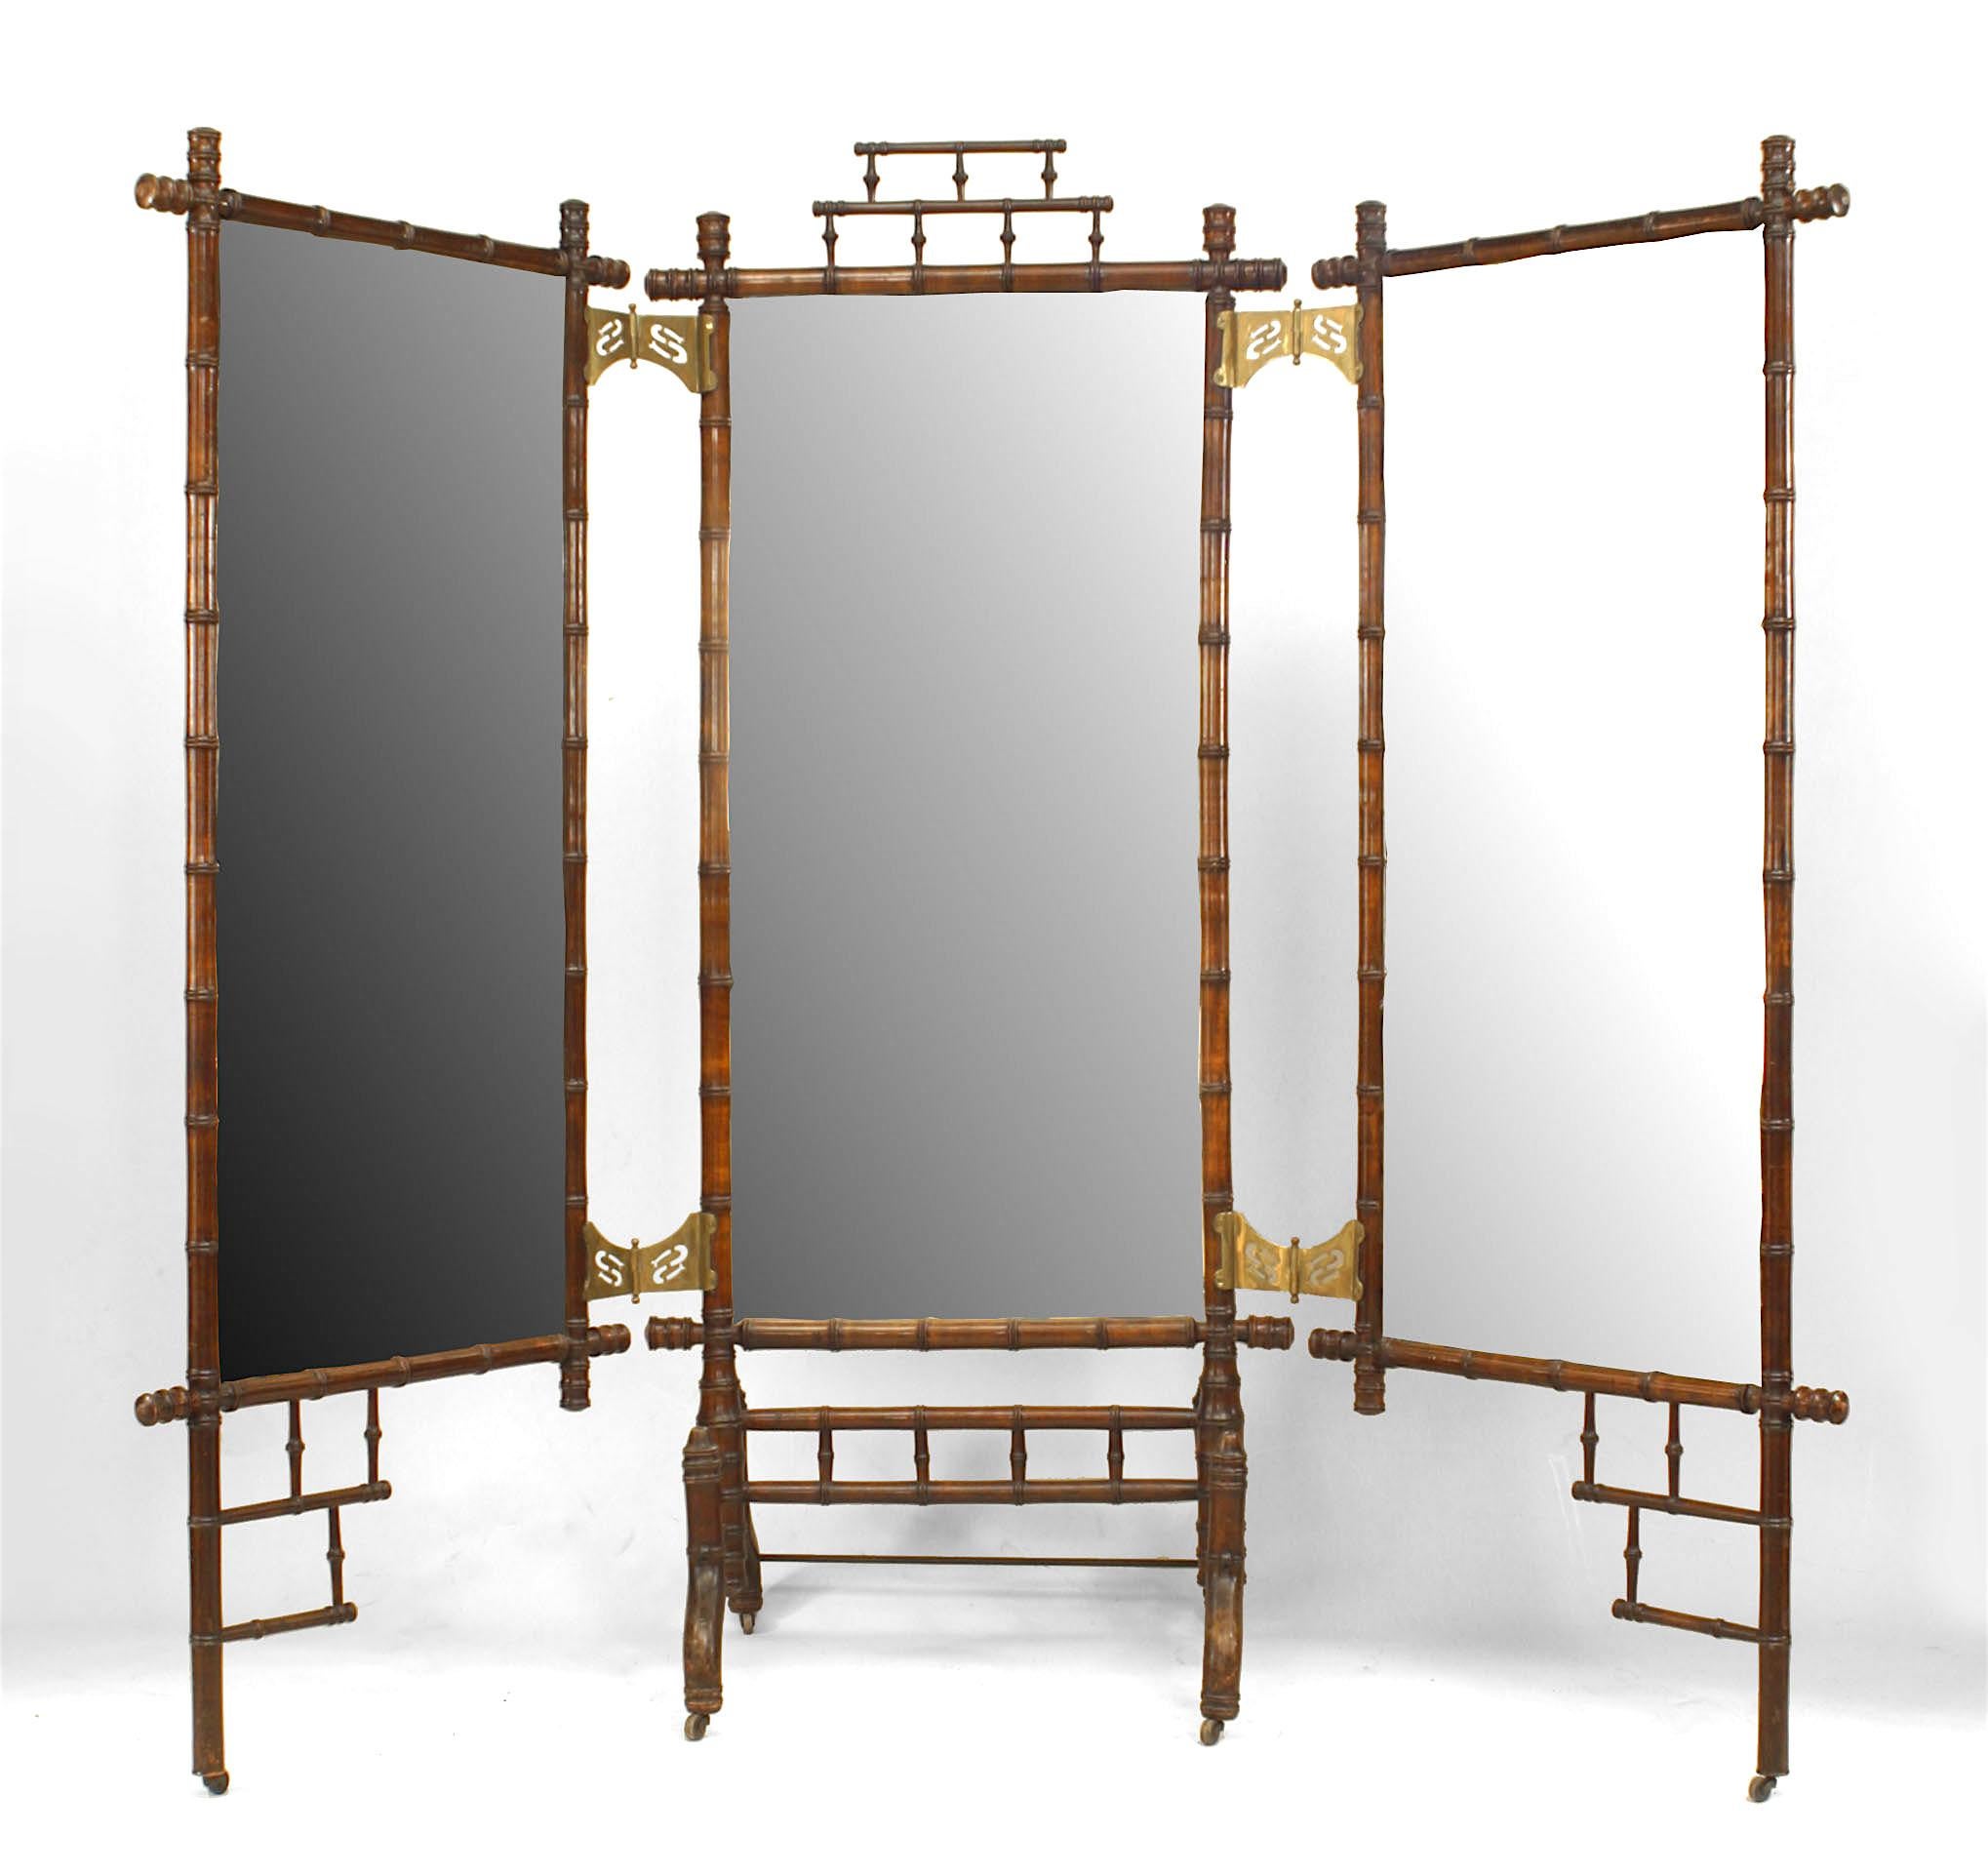 French Victorian faux bamboo (maple) three-fold (triptych) cheval mirror with open design top and bottom with brass hinges.
